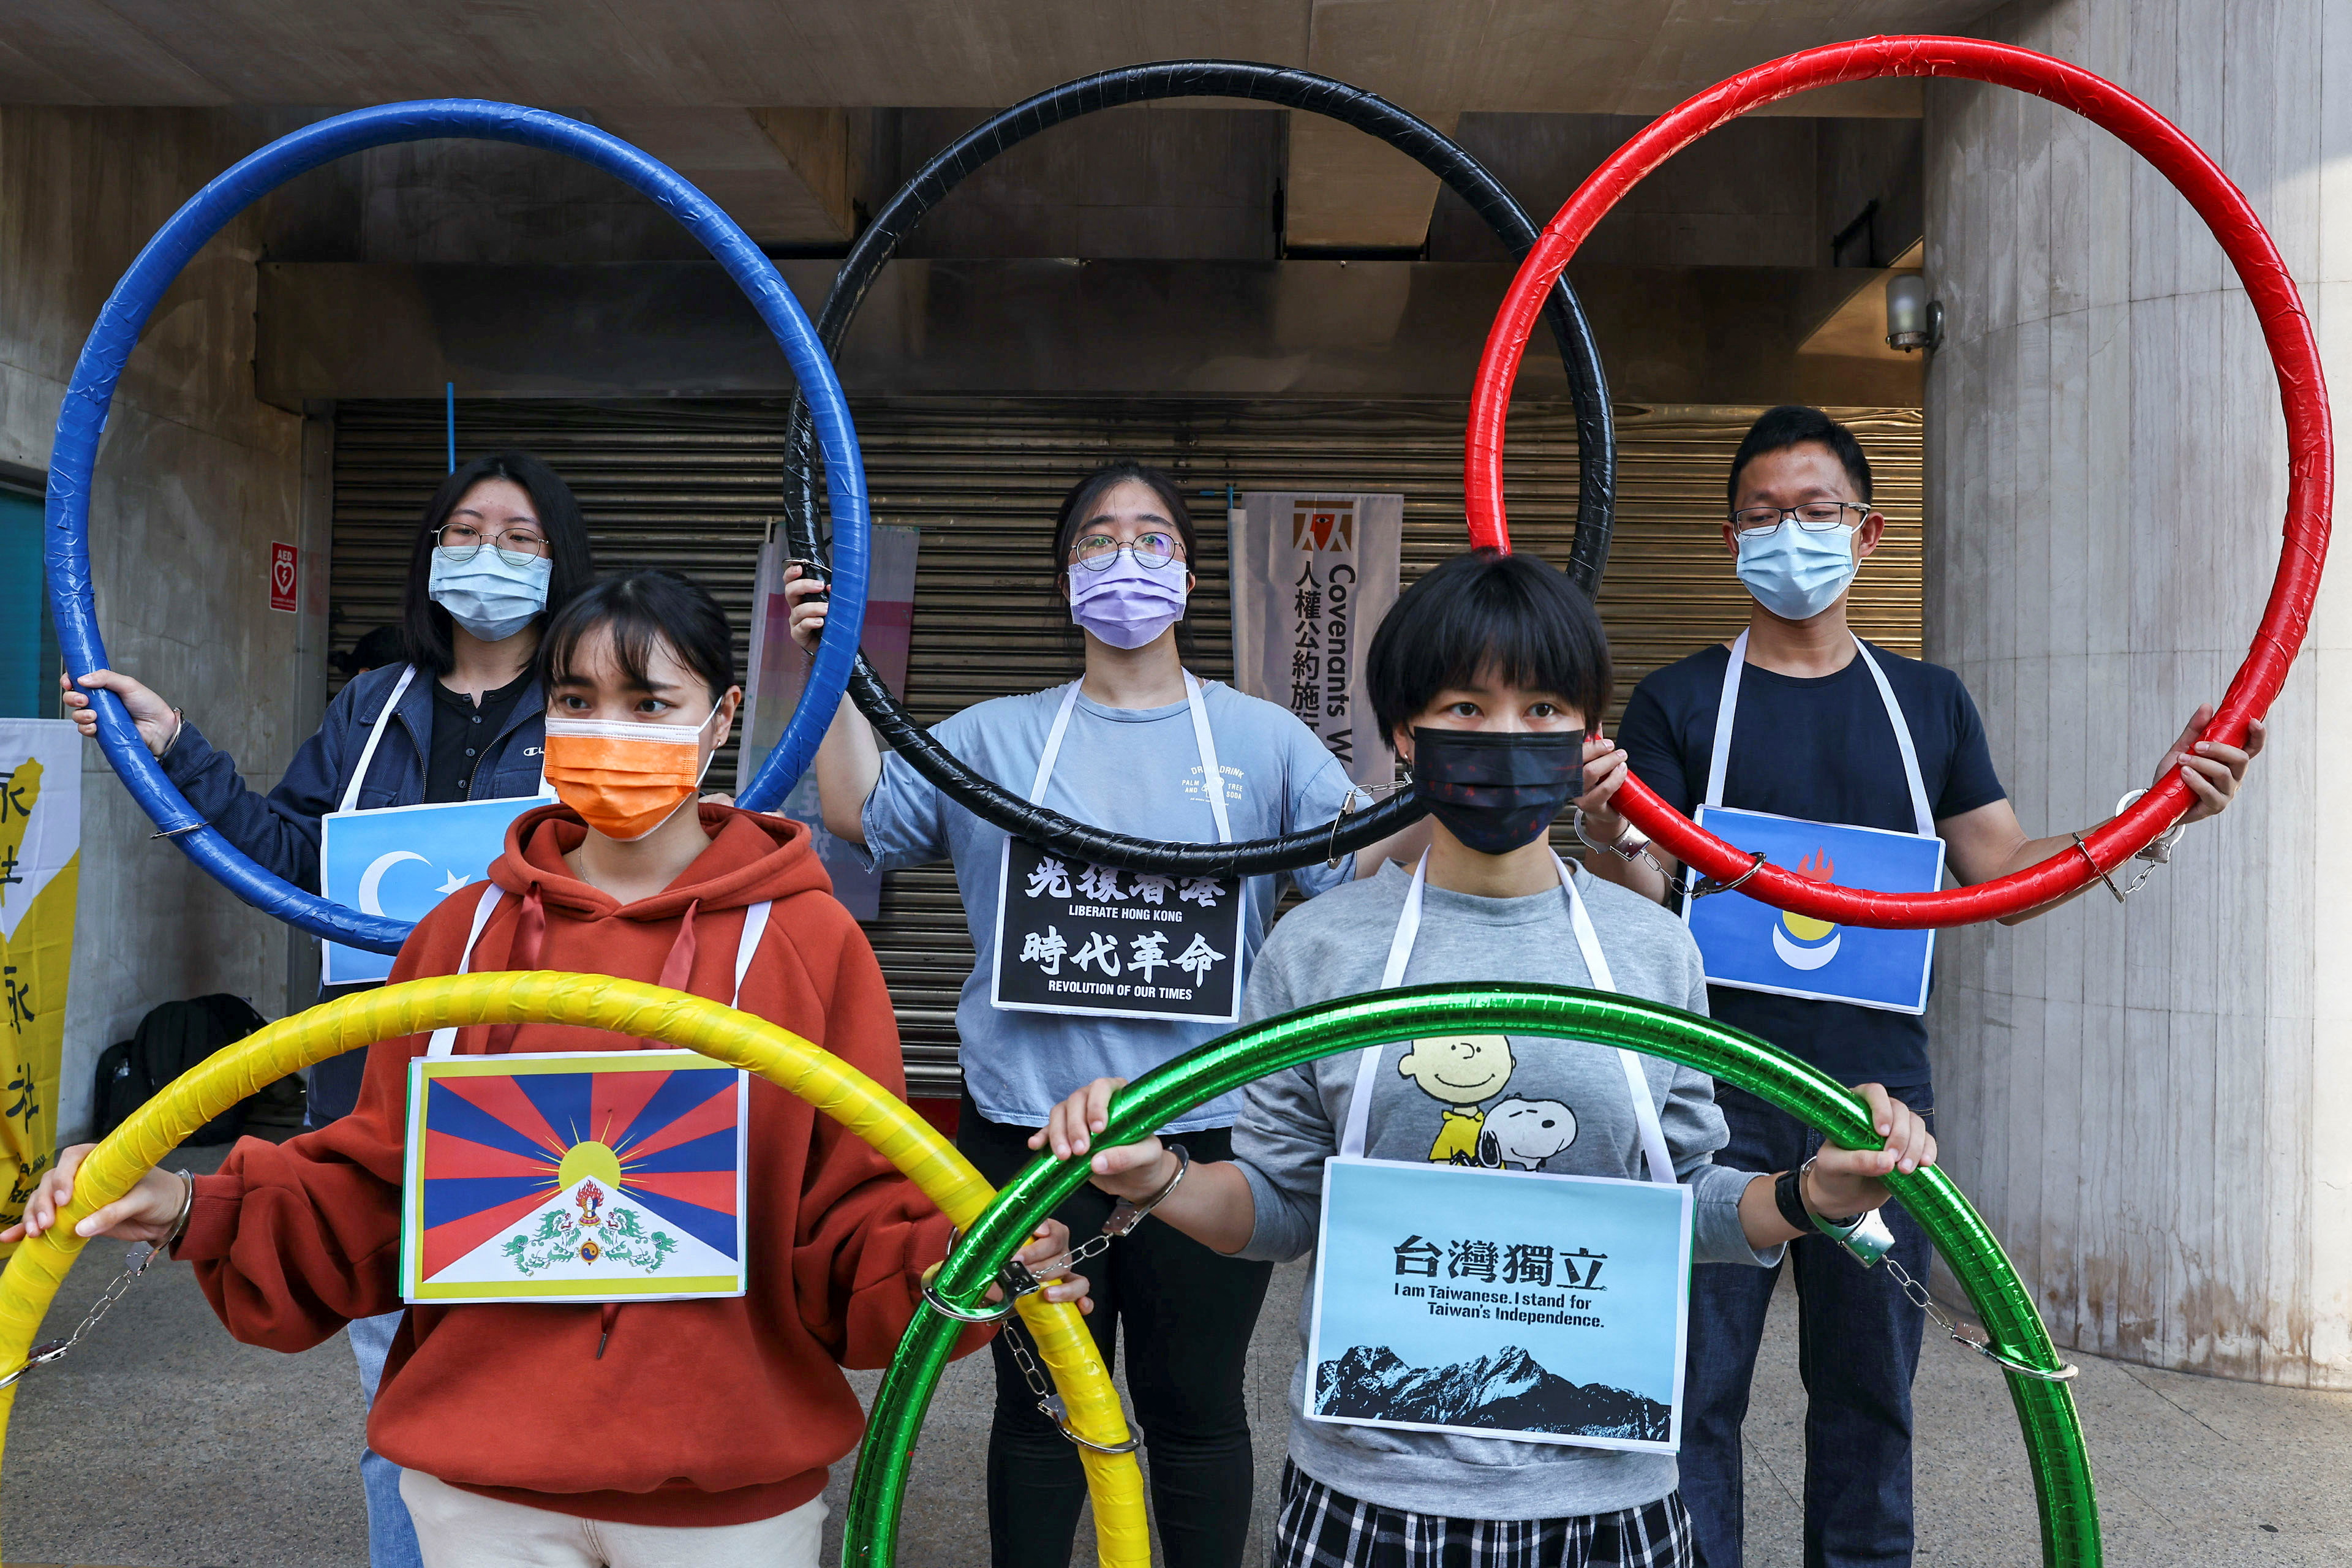 Activists hold a protest against Beijing holding the winter Olympics, in Taipei, Taiwan, January 26, 2022. REUTERS/Ann Wang